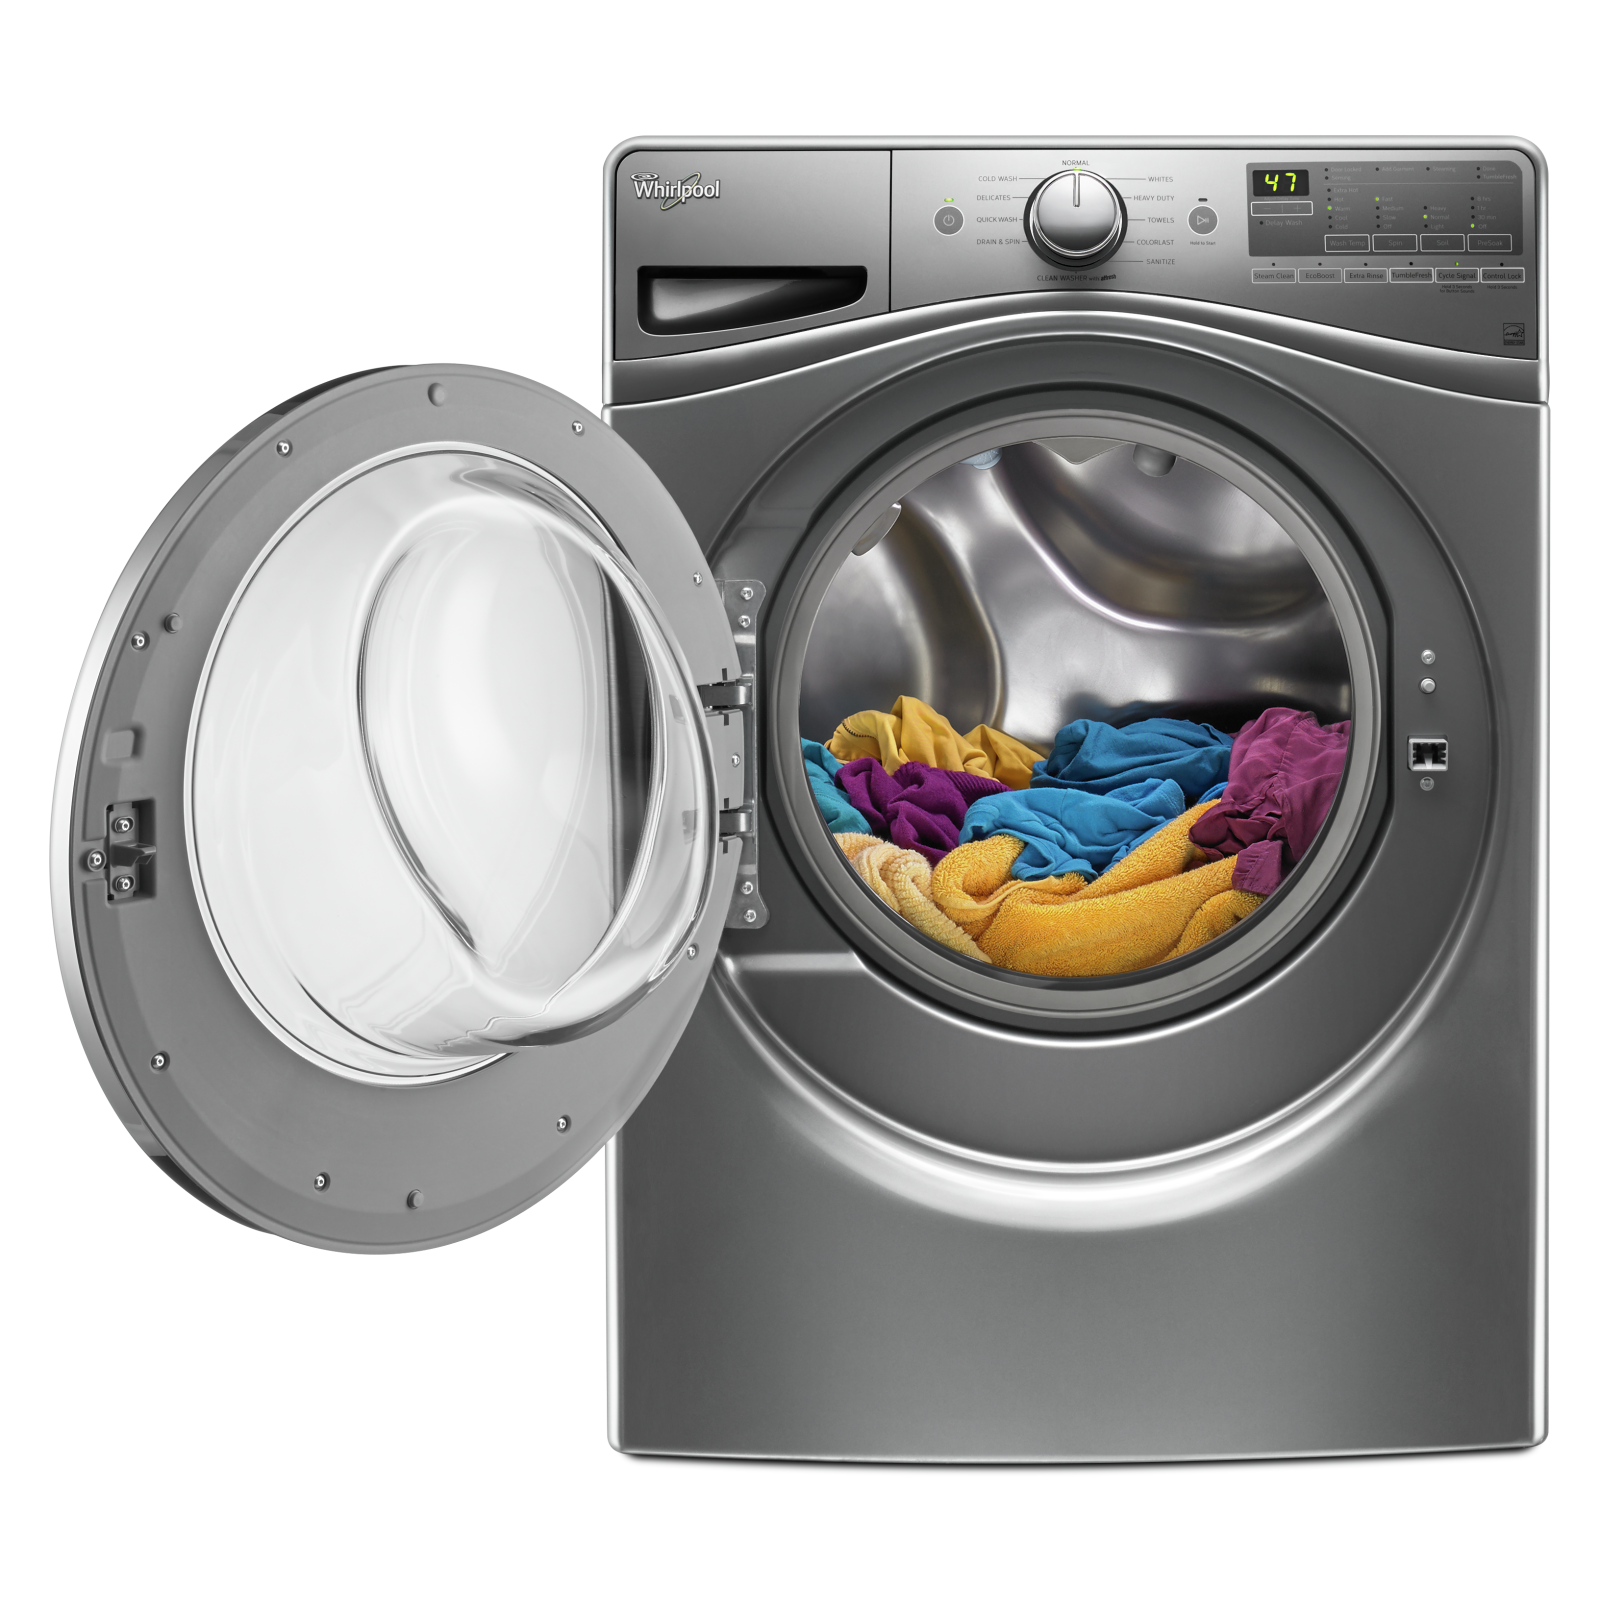 Whirlpool - 4.5 cu. Ft  Front Load Washer in Silver - WFW85HEFC